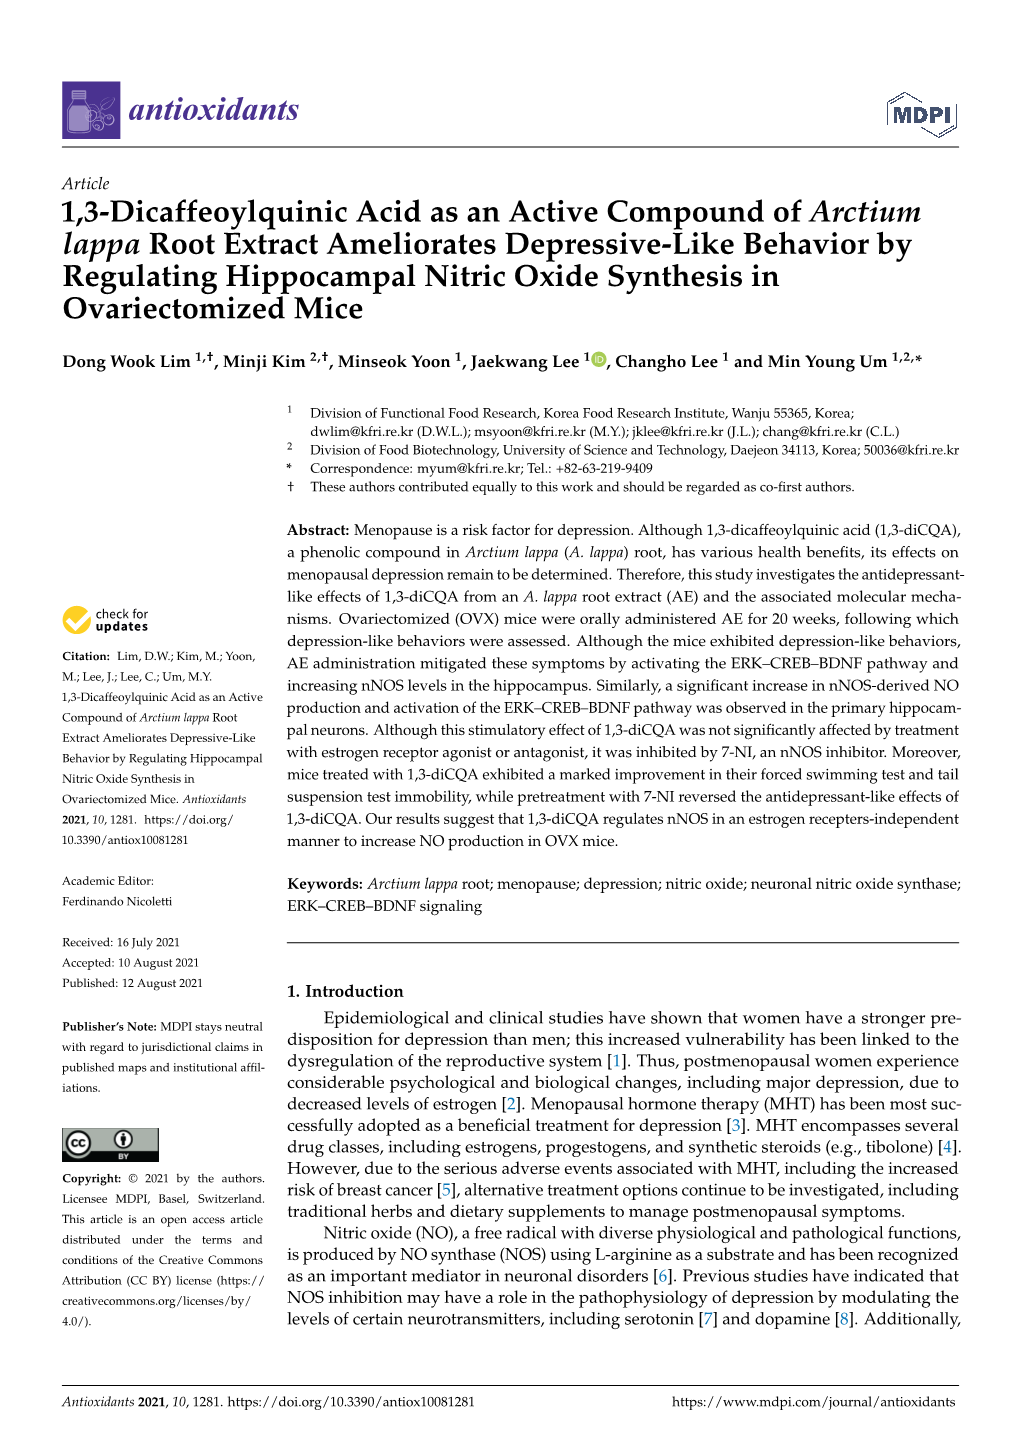 1,3-Dicaffeoylquinic Acid As an Active Compound of Arctium Lappa Root Extract Ameliorates Depressive-Like Behavior by Regulating